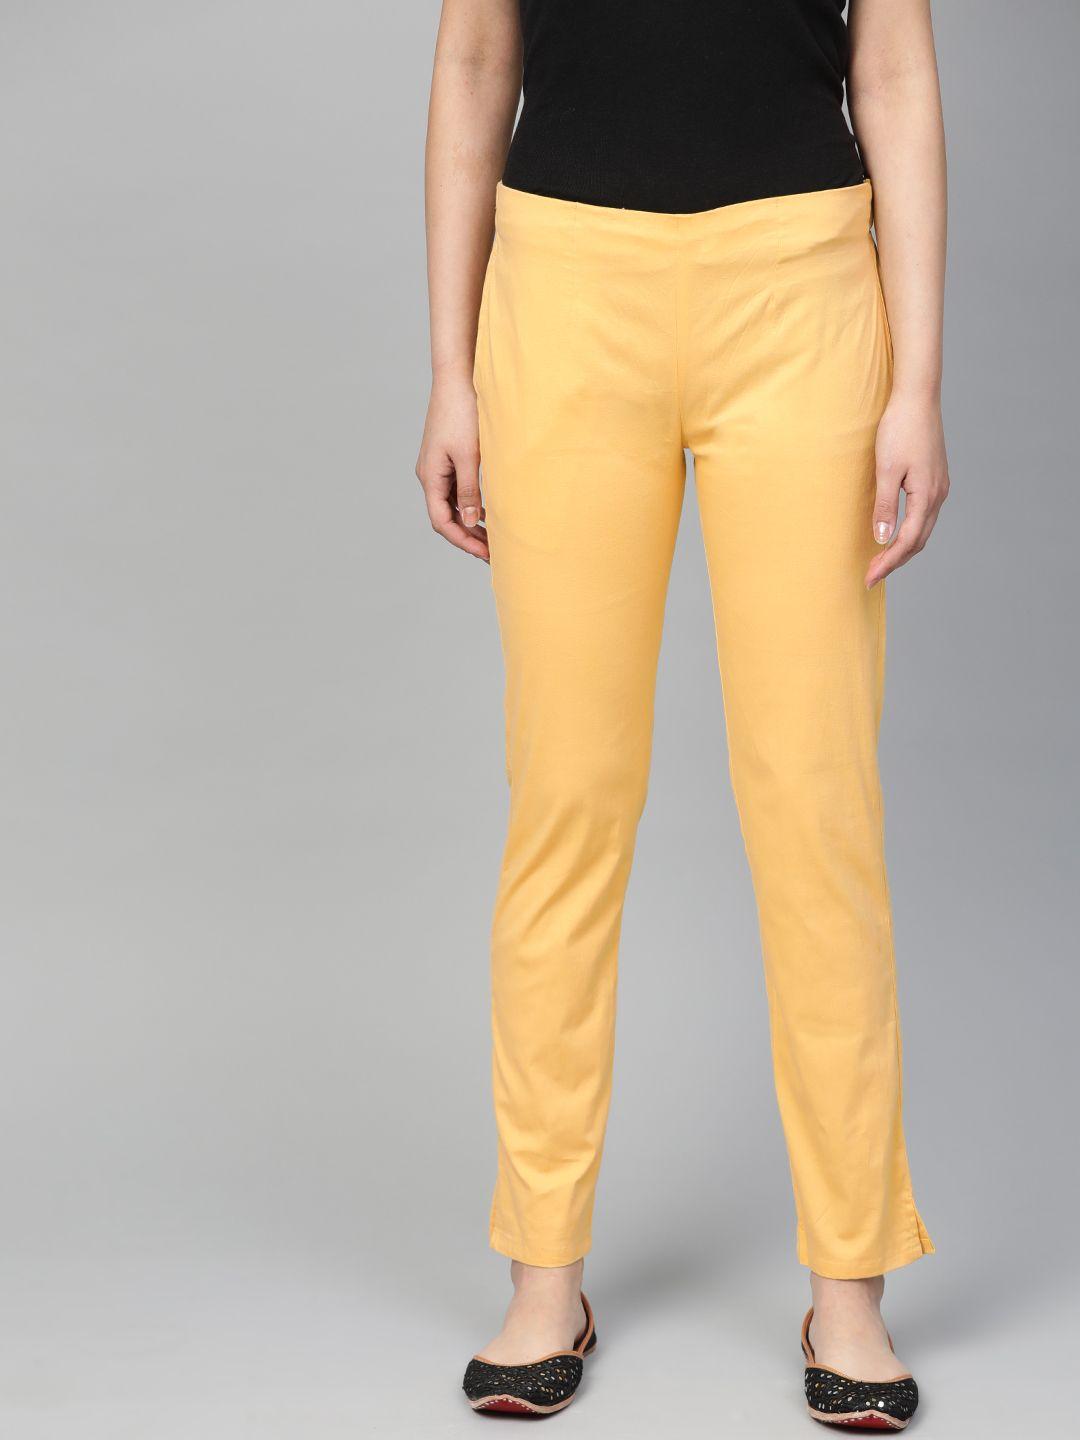 jompers women yellow smart slim fit solid cigarette trousers